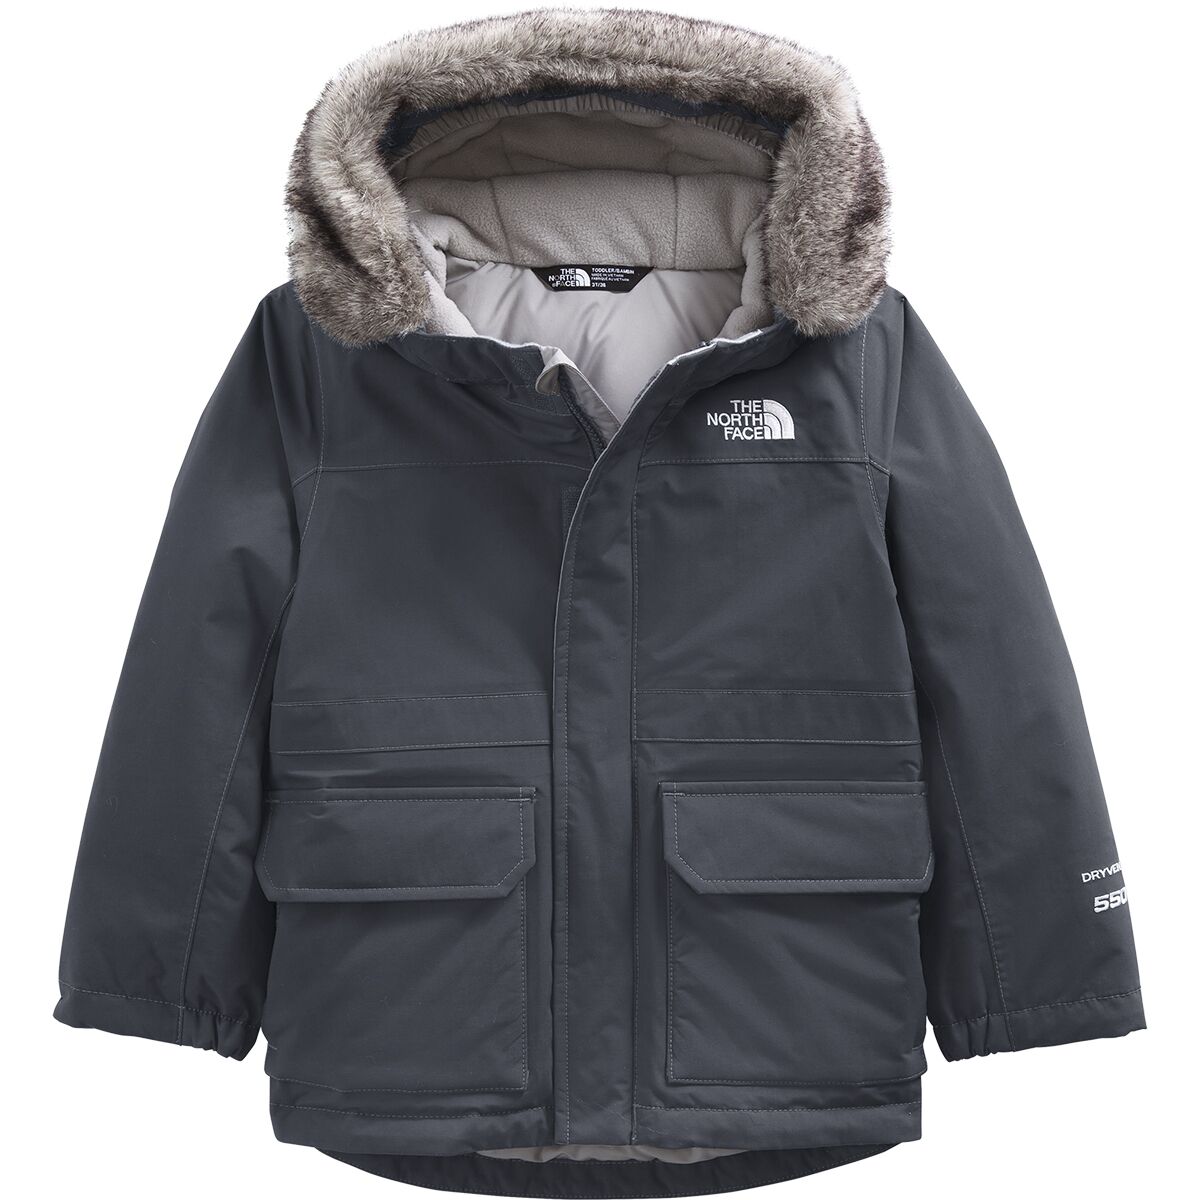 The North Face Arctic Parka - Toddler Boys'